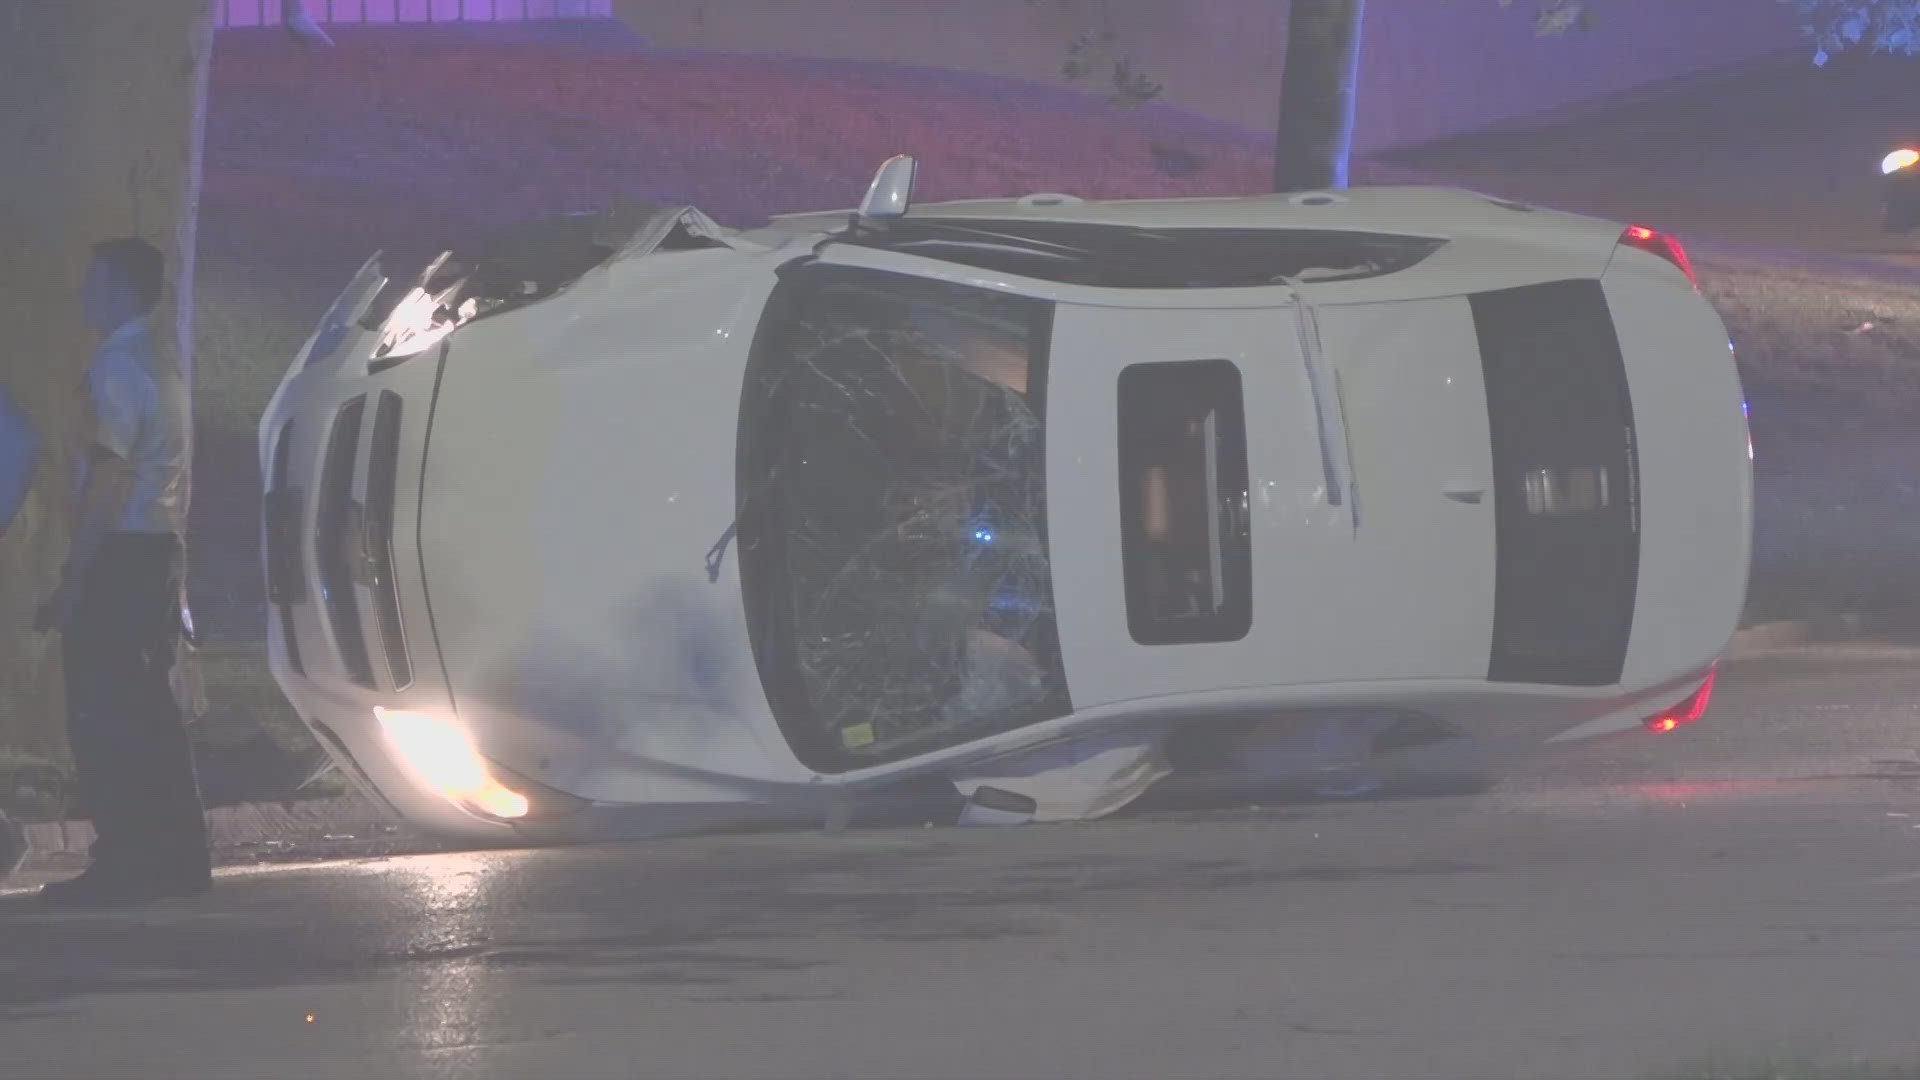 Police said the crash happened just before 2 a.m. Tuesday on southbound North Kingshighway. The driver of the car lost control, and the car ended up on its side.